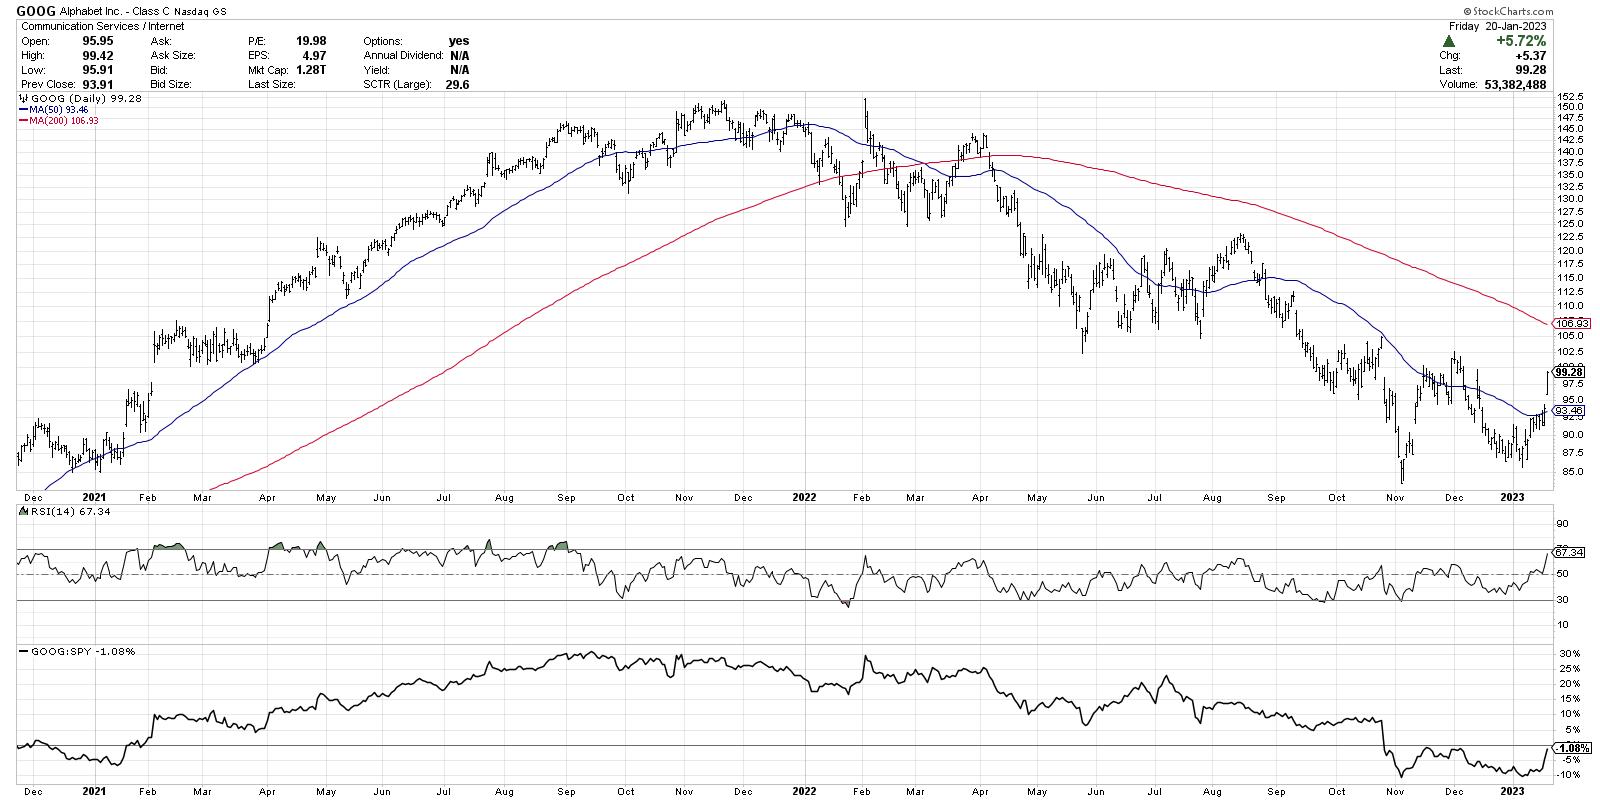 The Most Important Breadth Indicator to Follow